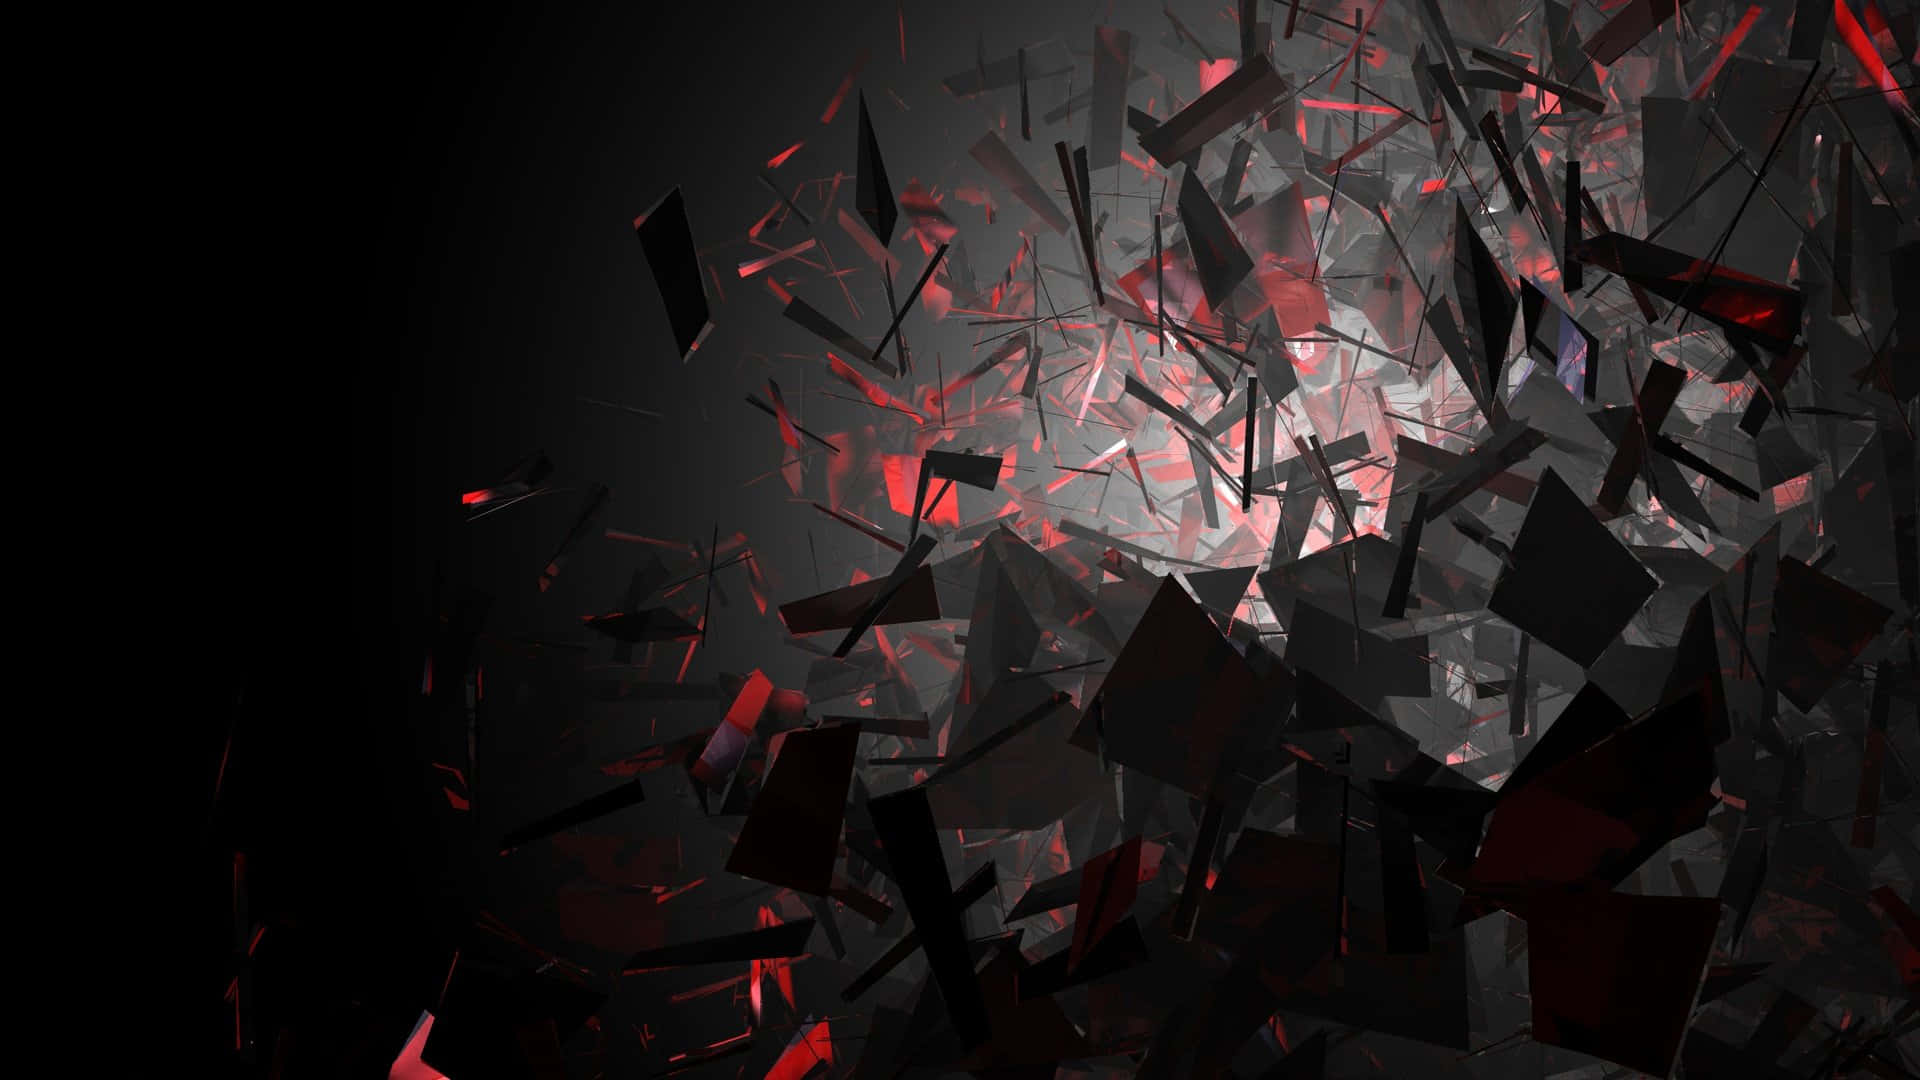 Immerse Yourself in the Mysterious Dark Abstract: